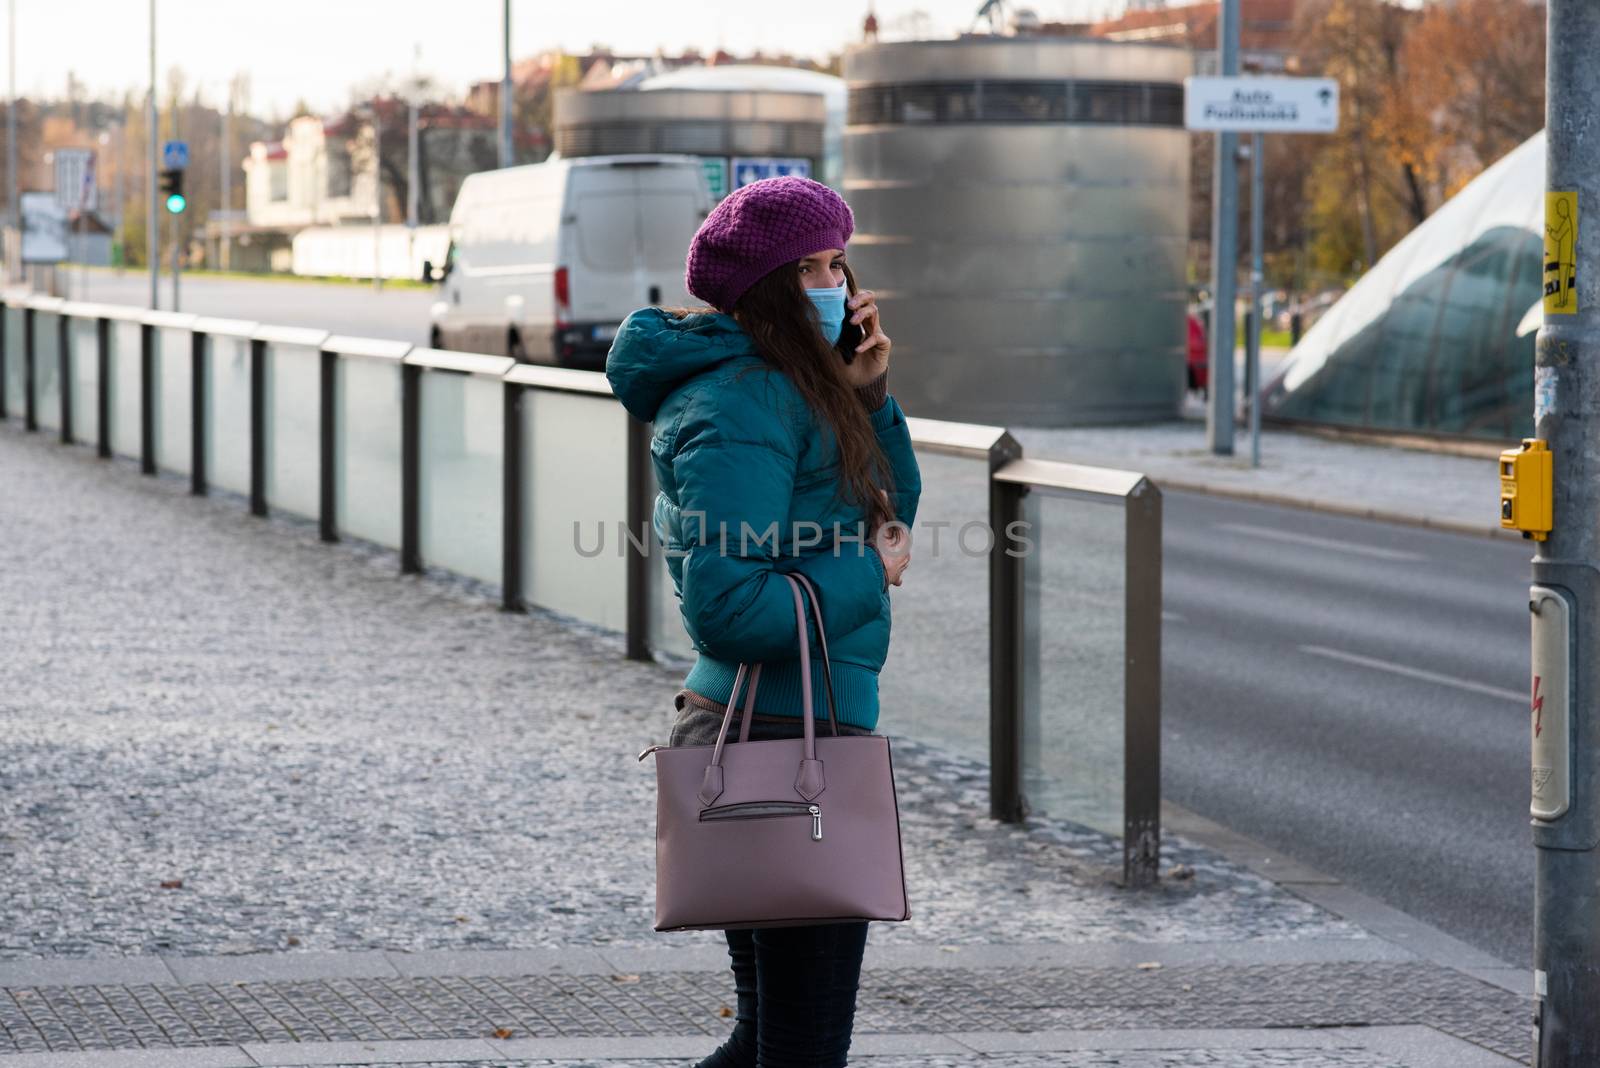 11-23-2020. Prague, Czech Republic. People walking and talking outside during coronavirus (COVID-19) at Hradcanska metro stop in Prague 6. Woman with mask waiting to cross..